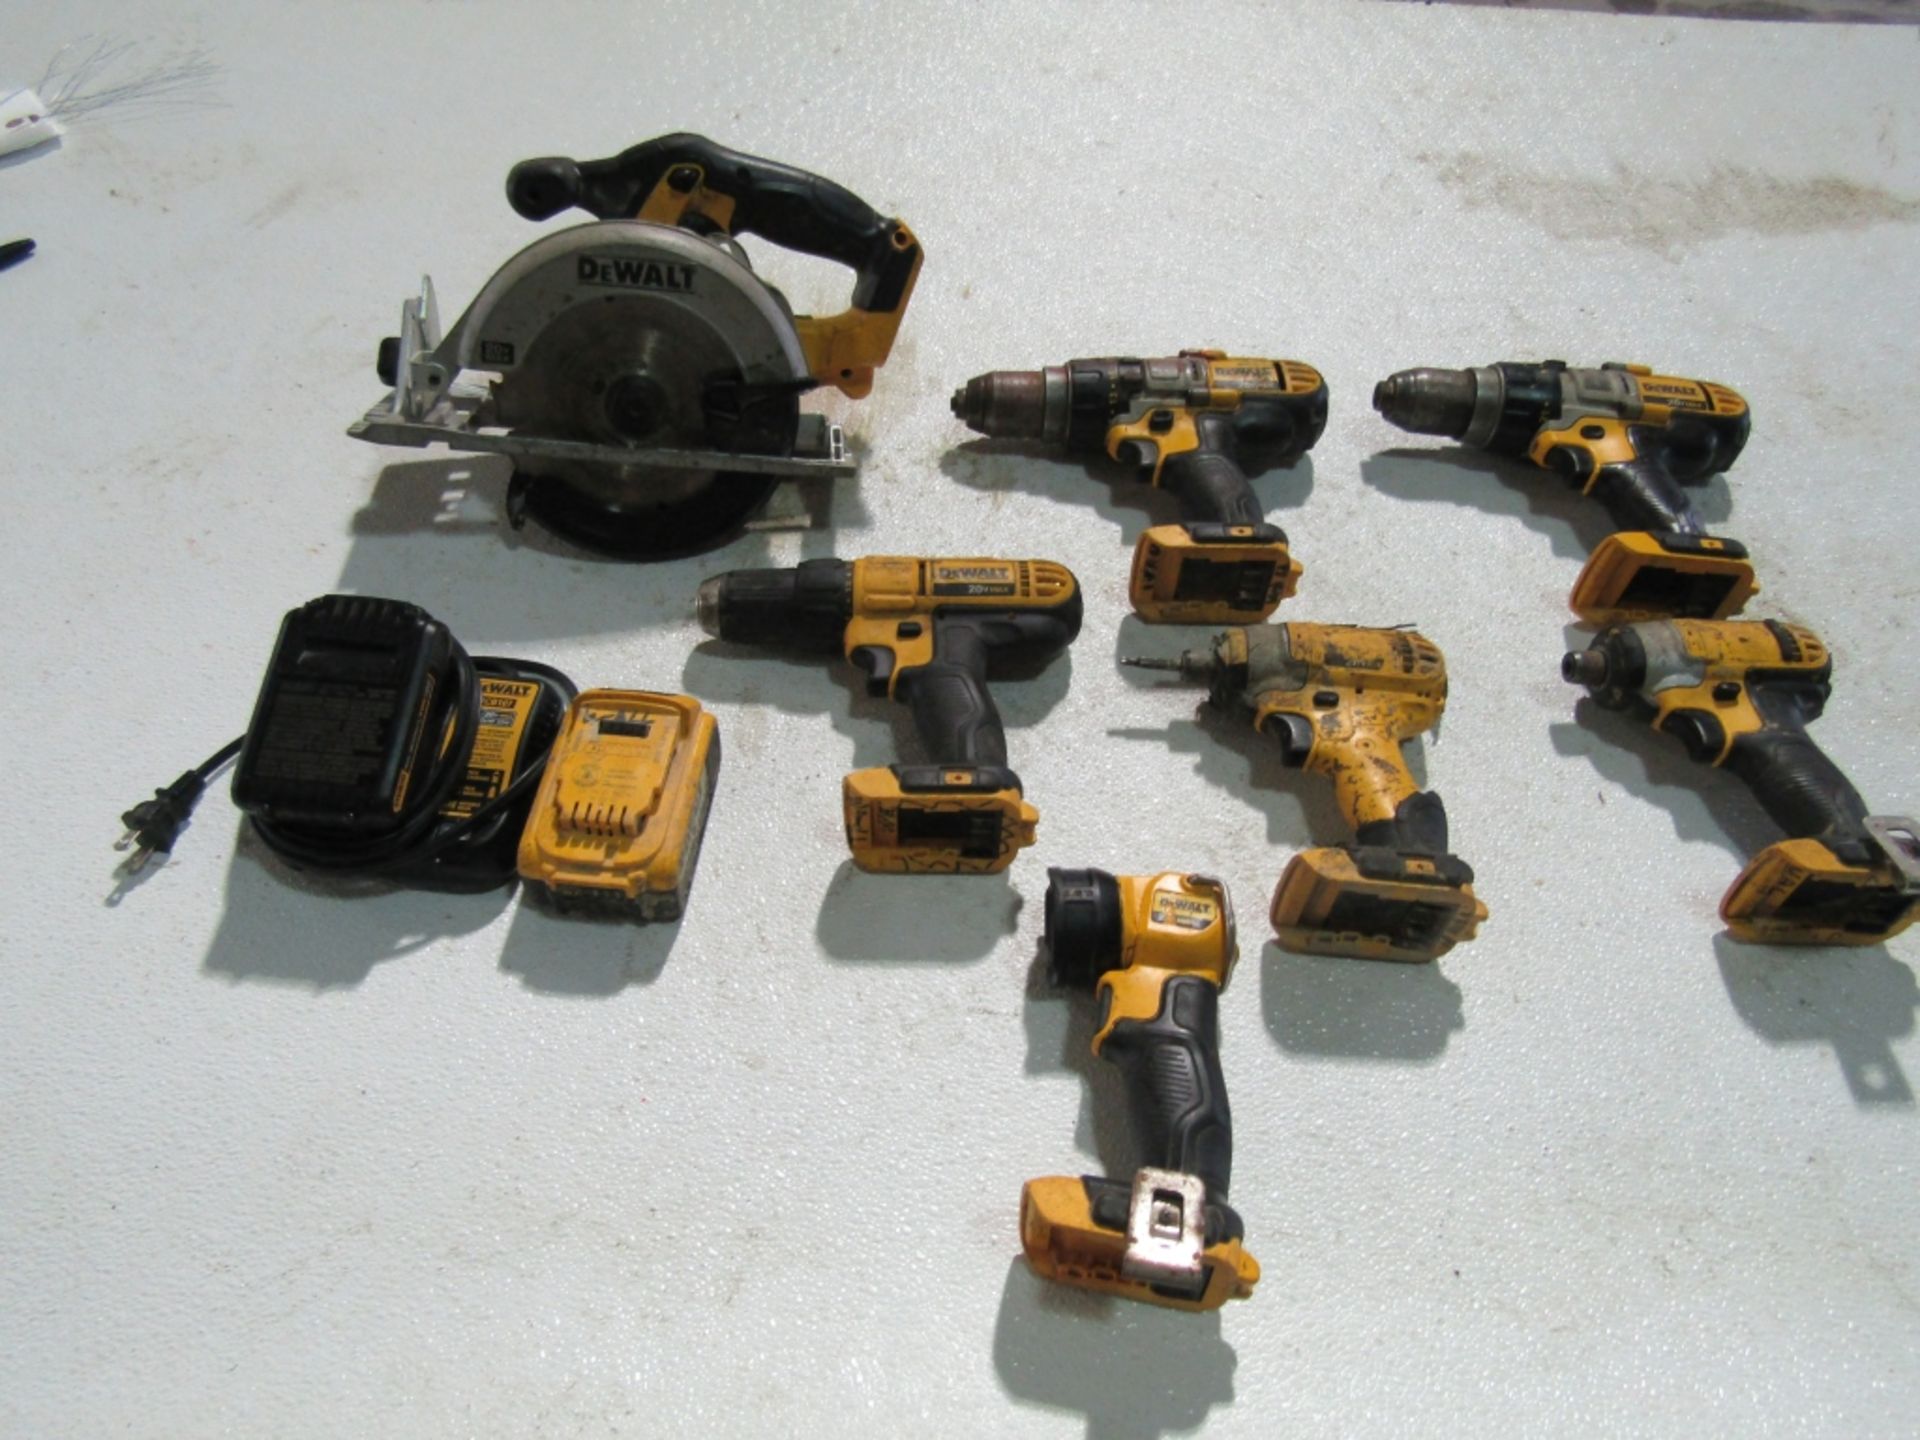 DeWalt Cordless Set with Battery & Charger, Circular Saw, (3) Drills, (2) Impact Drill & (1)